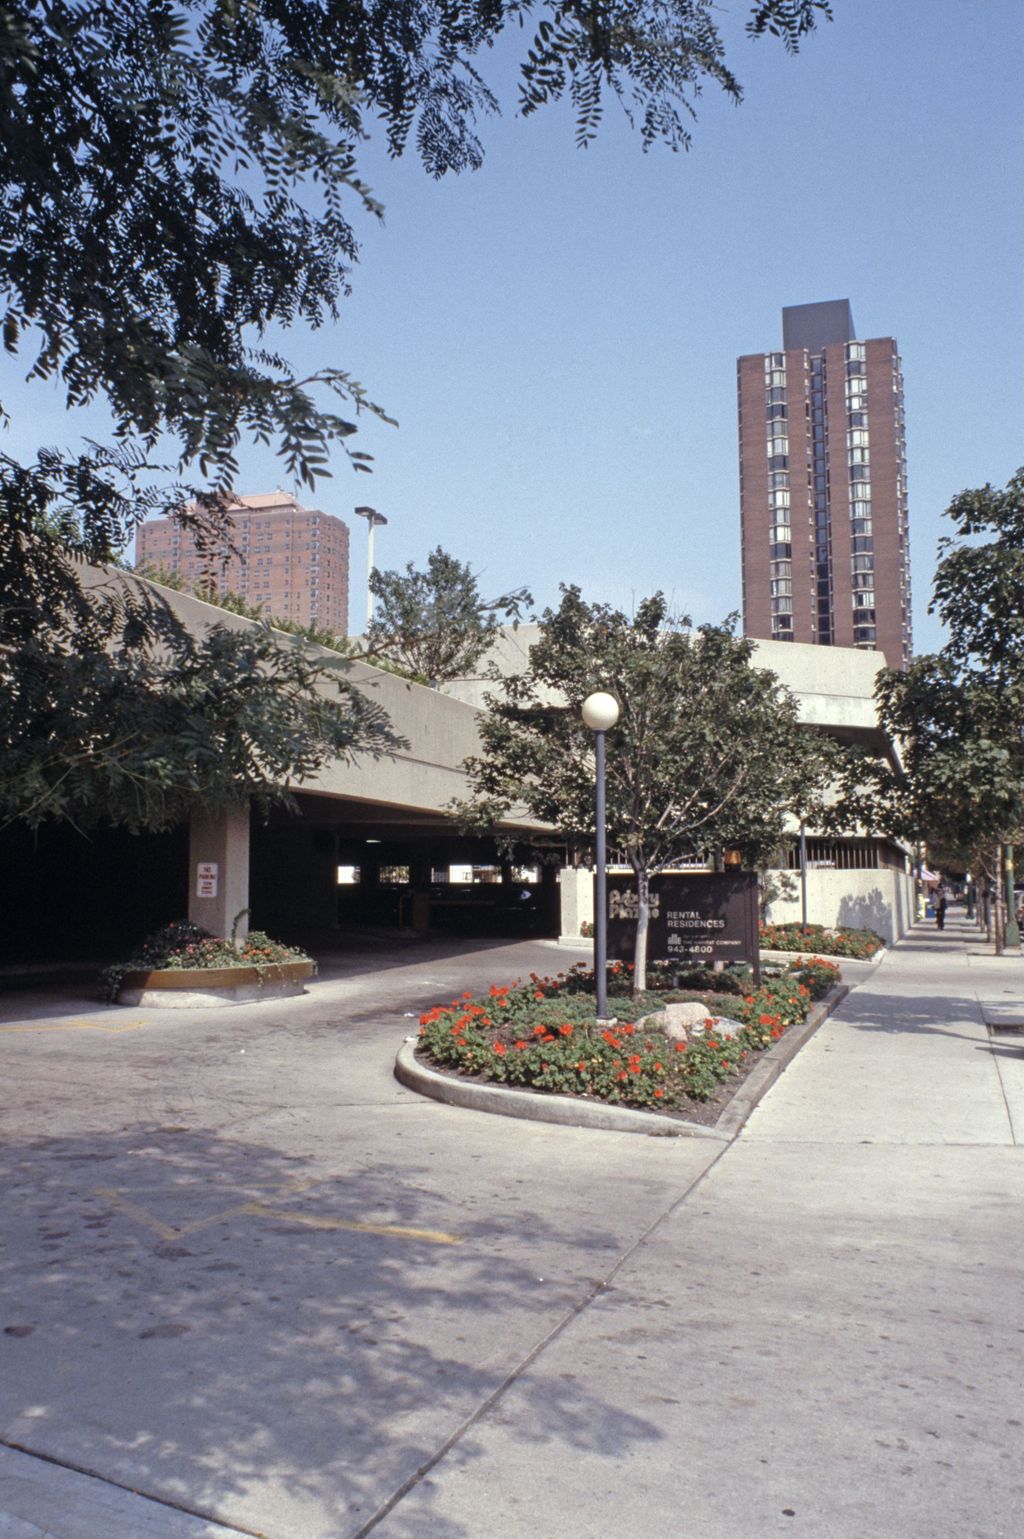 Asbury Plaza, parking structure